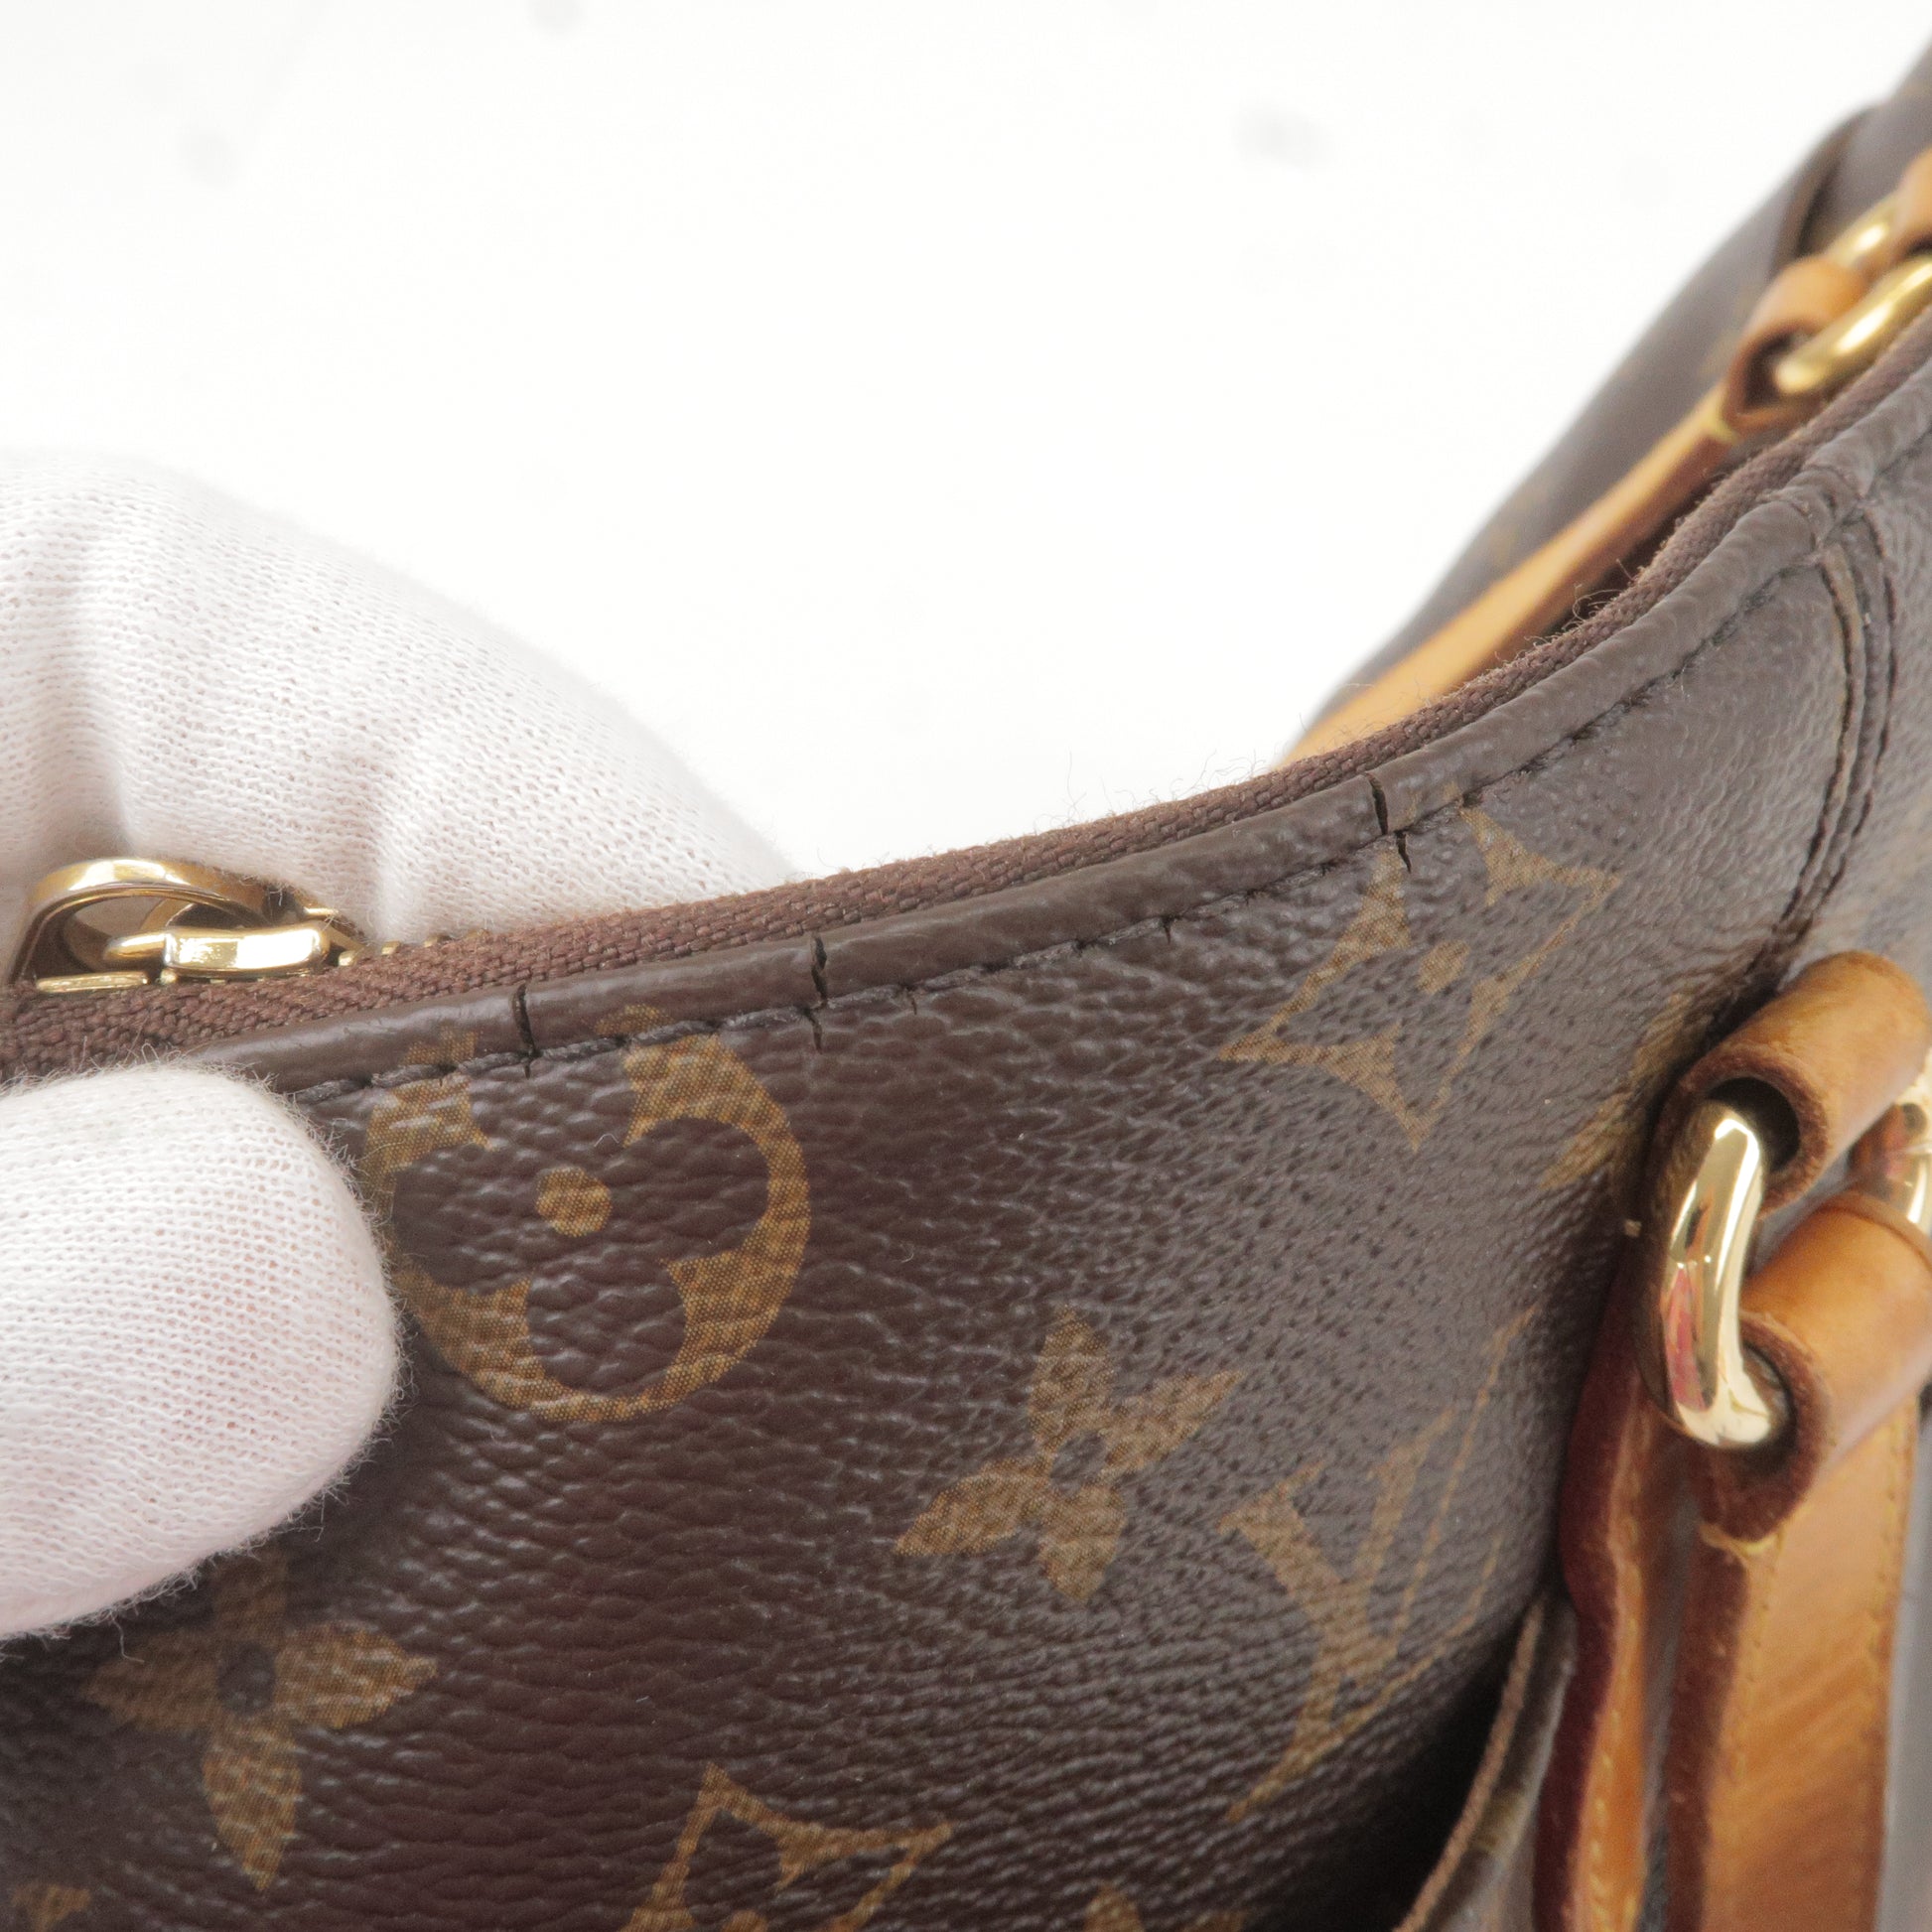 Louis Vuitton Pre-loved Monogram Totally Pm